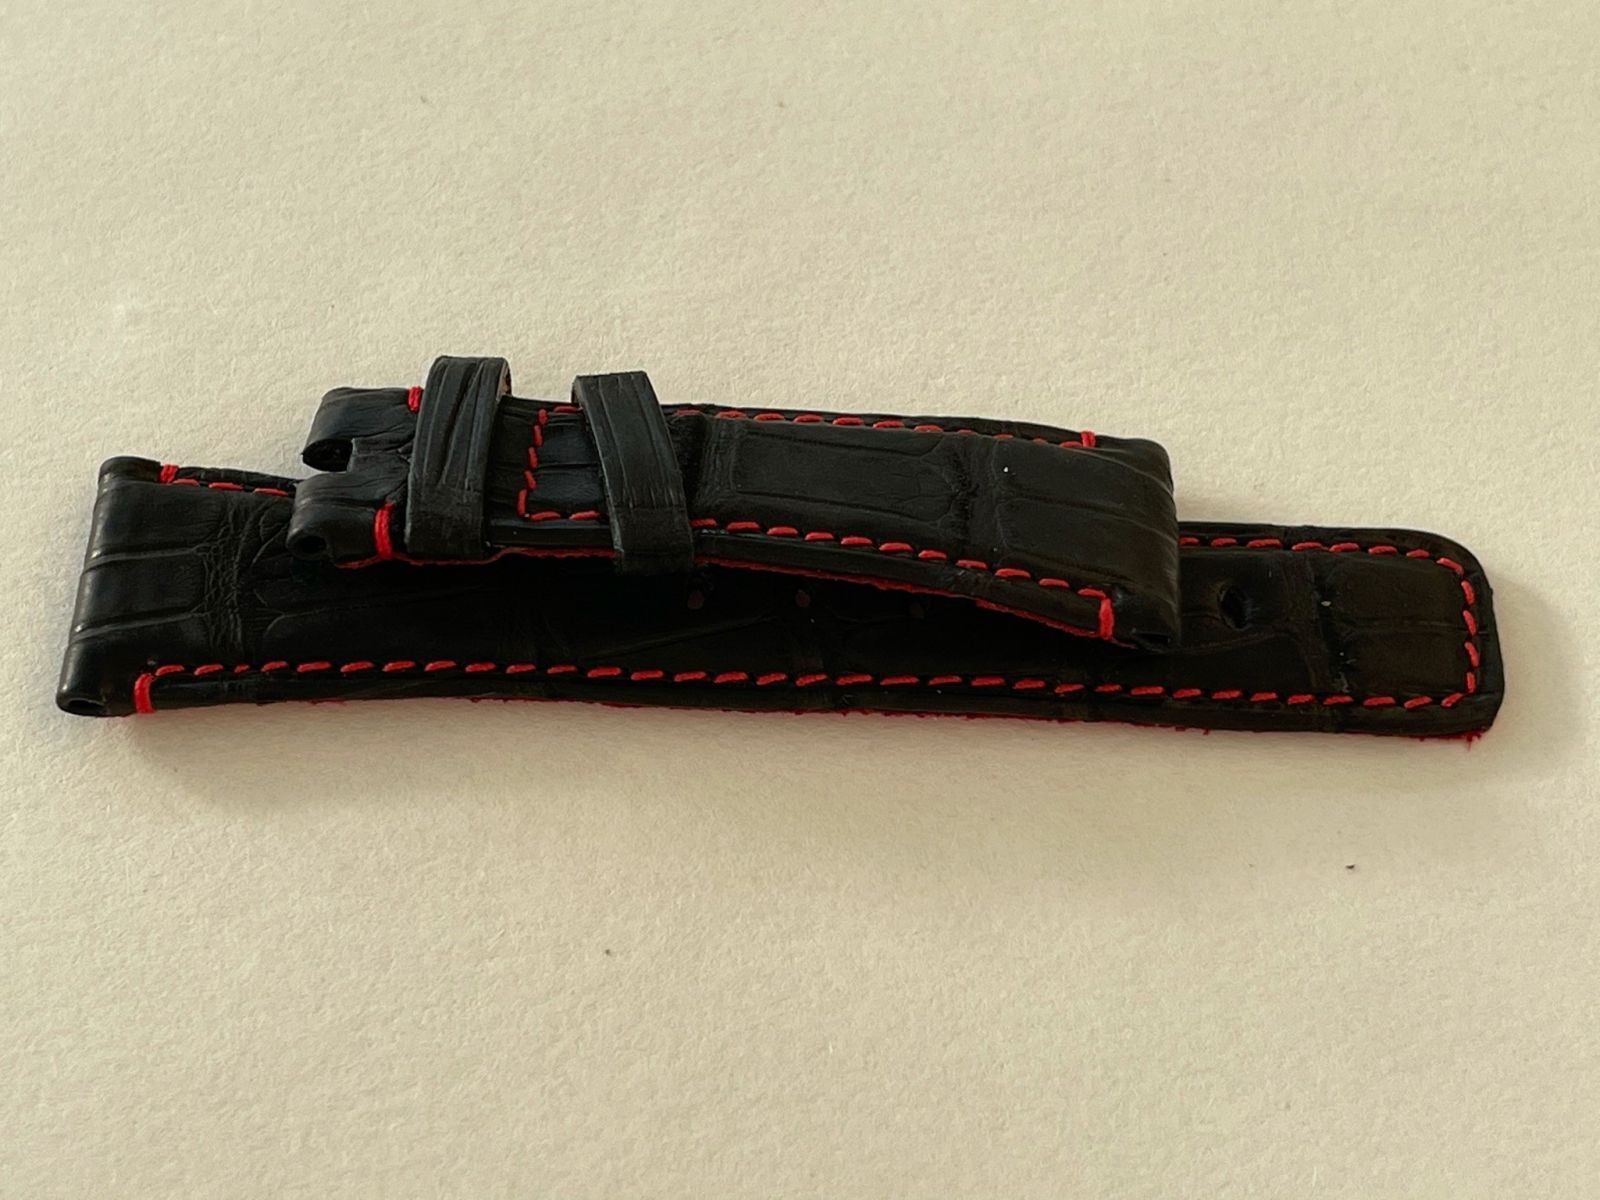 Black Barenia / Luxury Hermes French calf leather strap General style